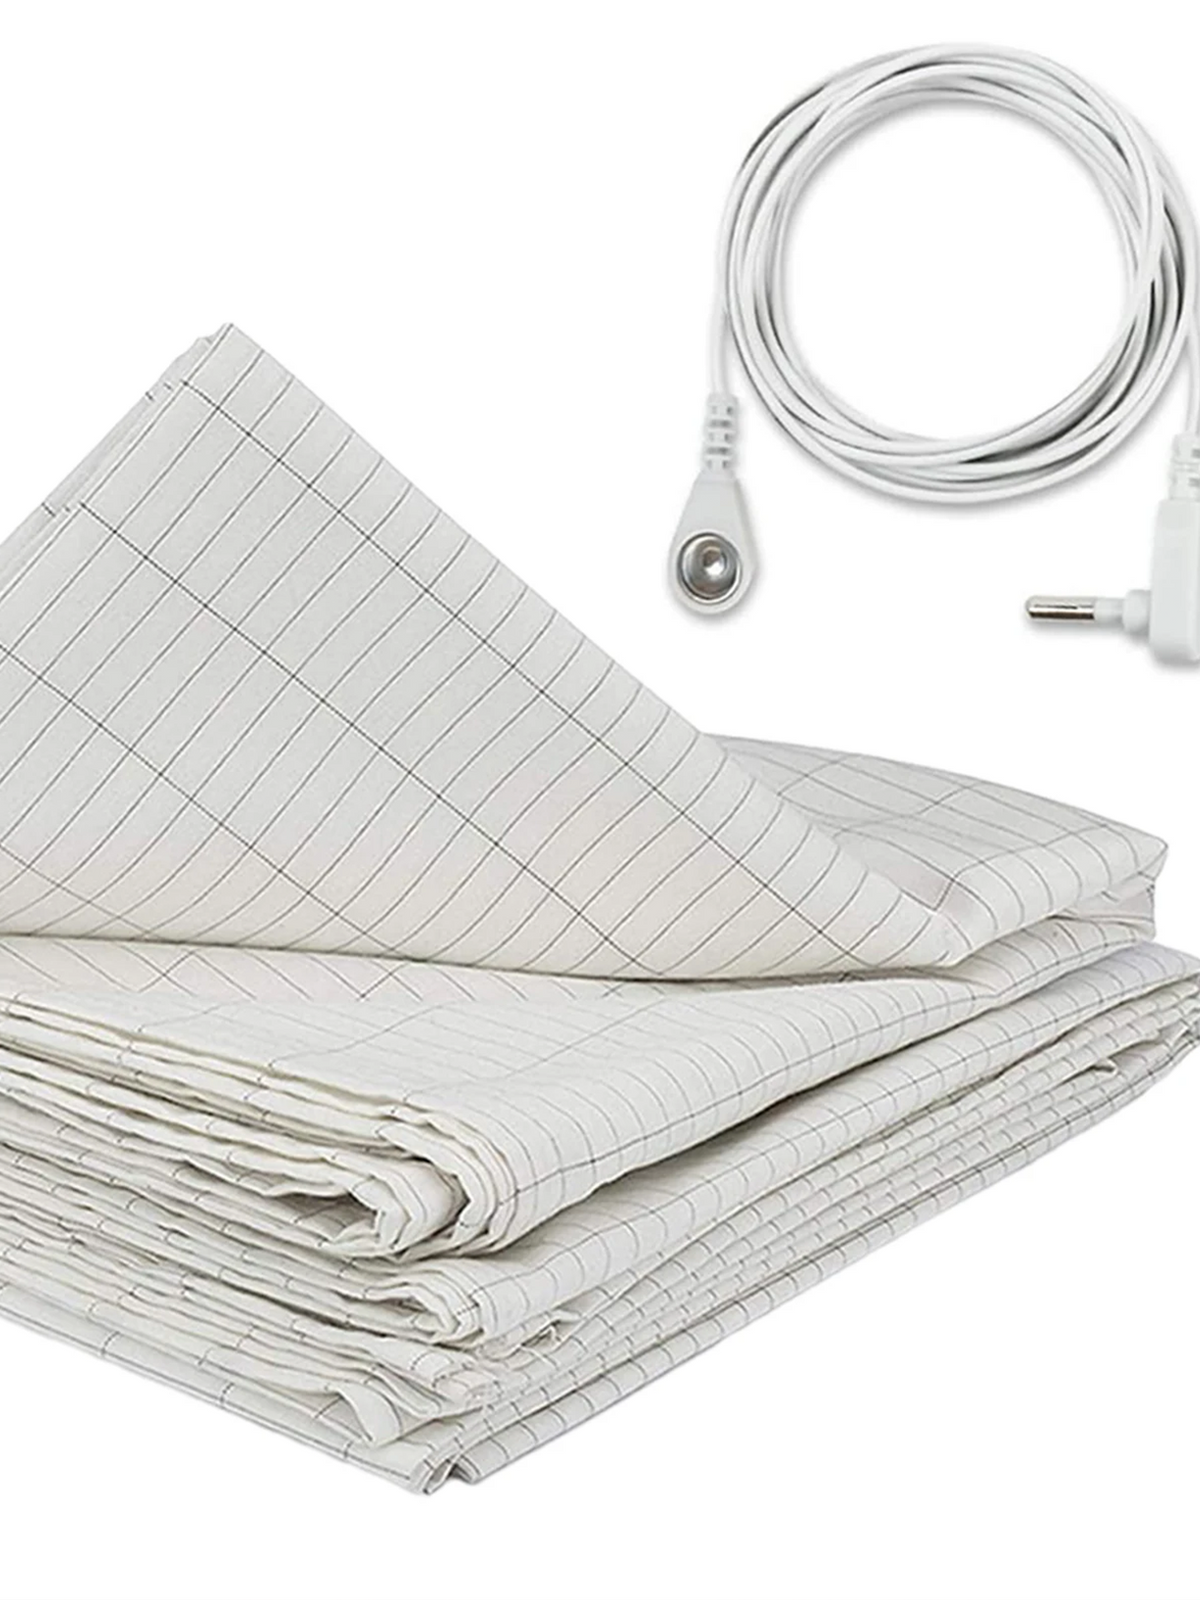 Earthing/Grounding Organic Cotton  Flat Bed Sheet with Conductive Silver Fiber